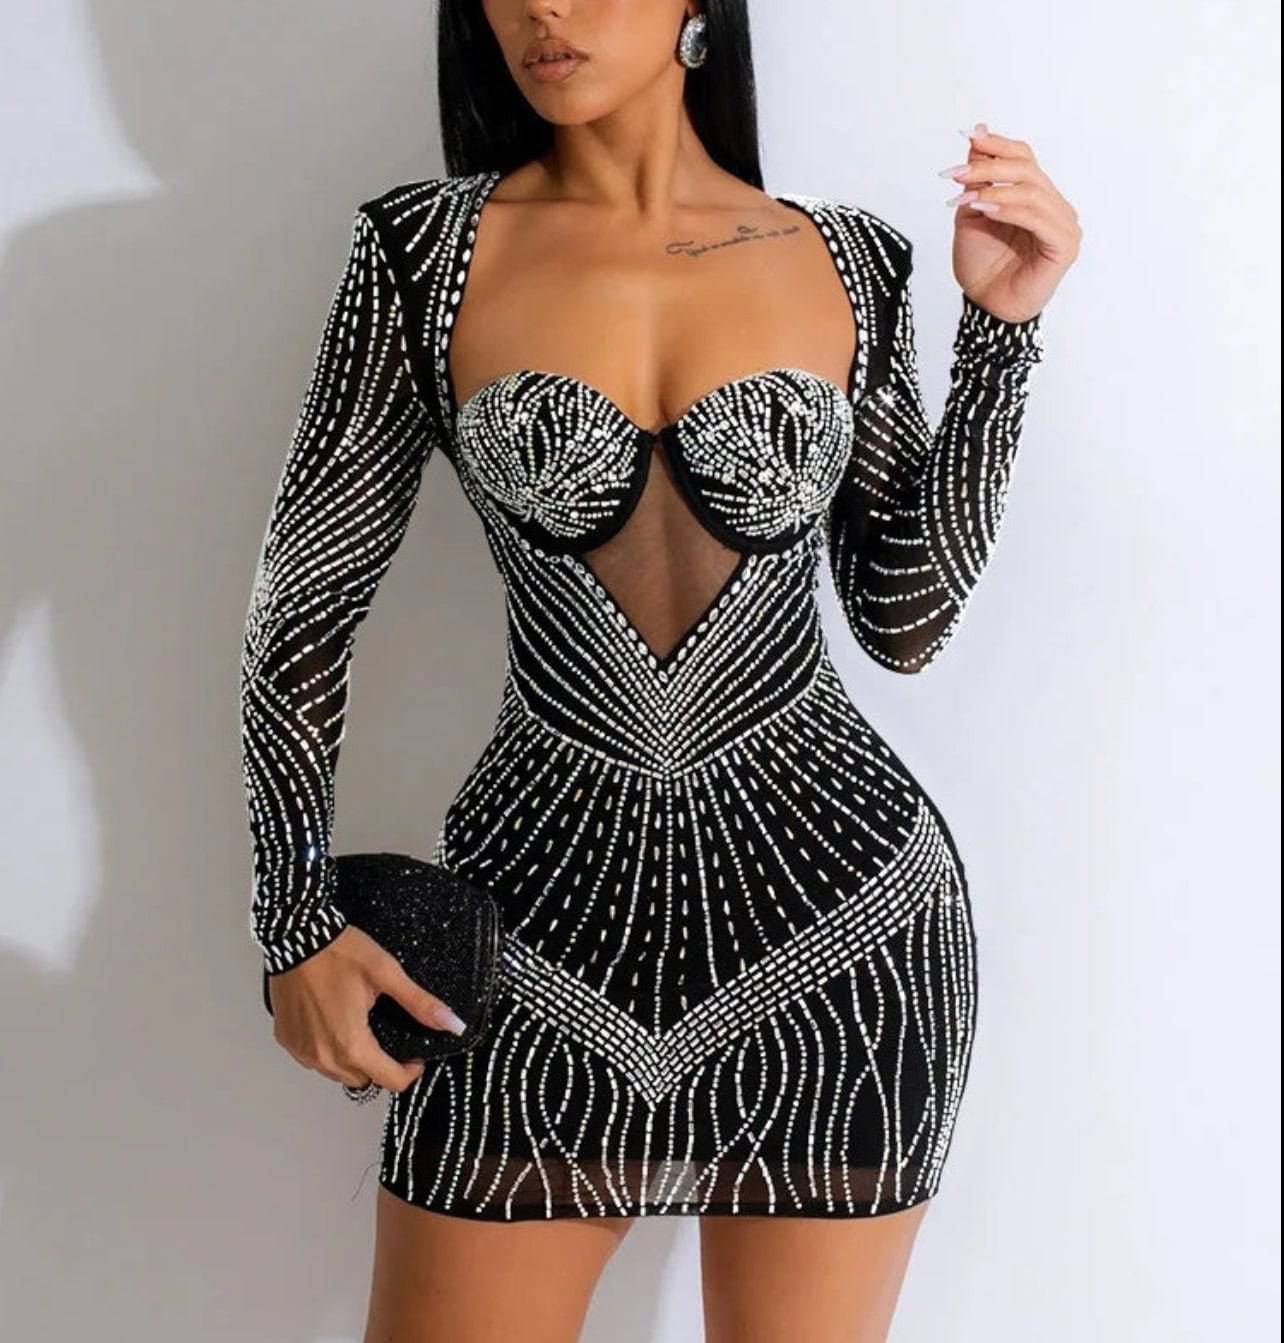 Sparkling Starlight Party Dress - Veronica Luxe-bandage dress